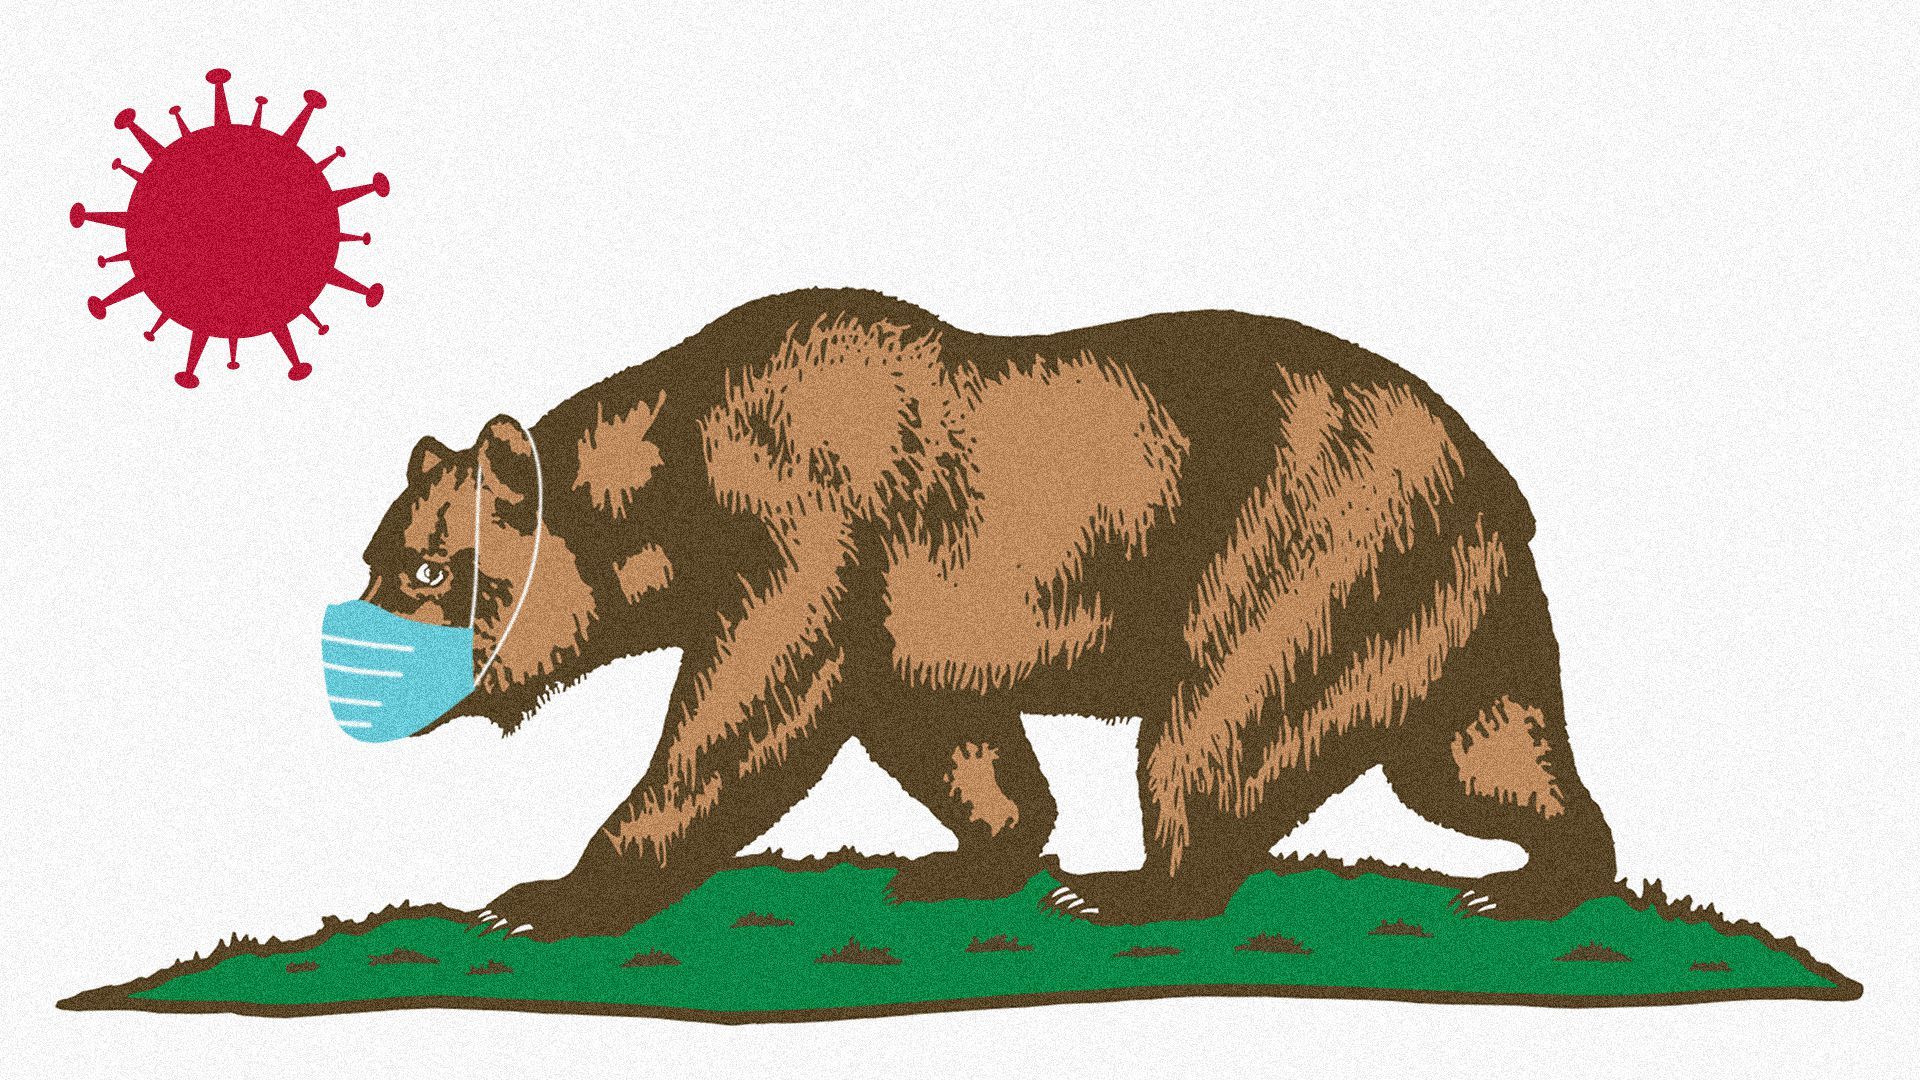 Illustration of the California state flag with COVID-19 replacing the star and the bear wearing a mask.